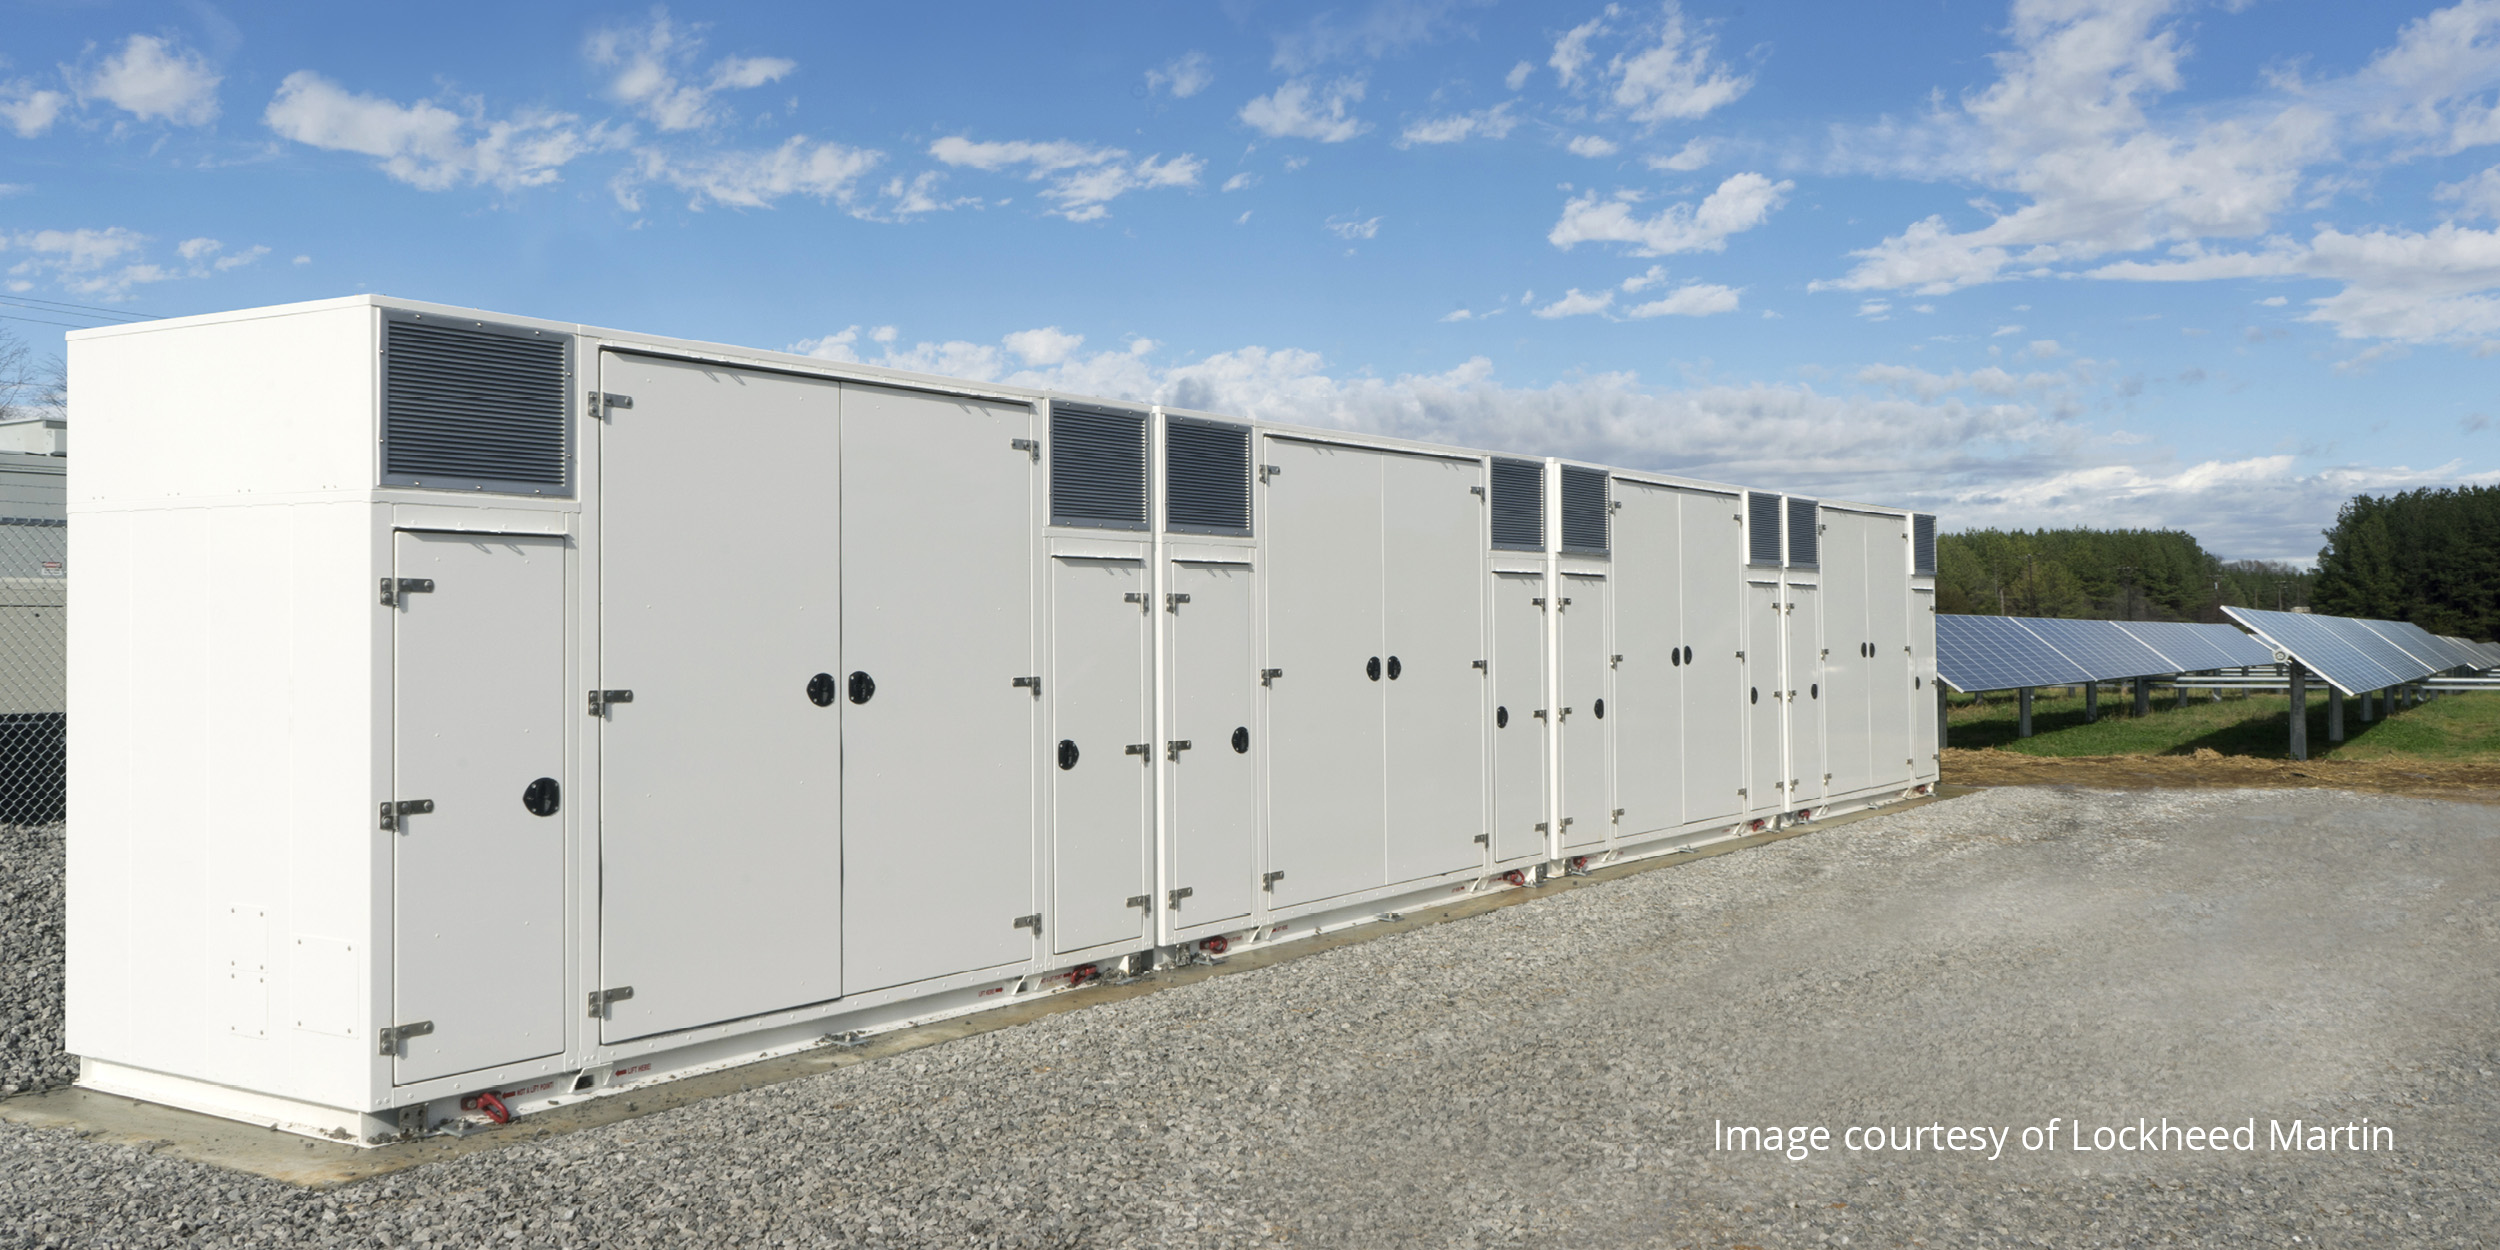 Storage is a natural extension of SunPower’s commercial solar business and 30 percent of booked customer projects include battery technology.